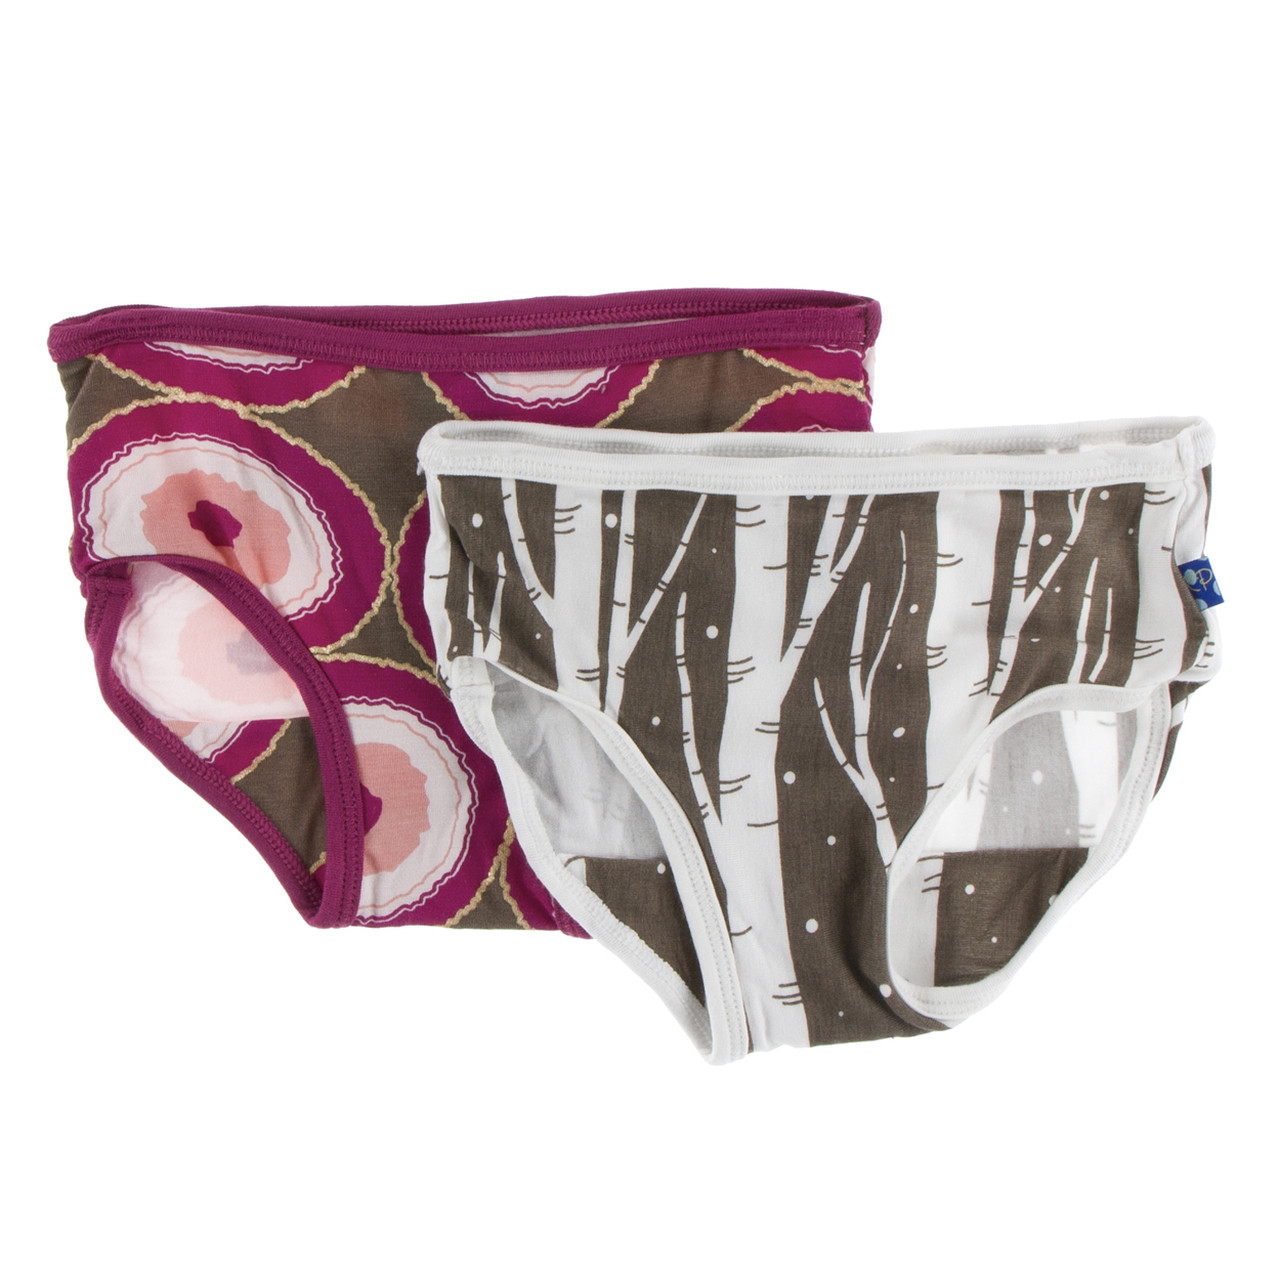 Kickee Pants Girl Underwear (Set of 2), Raisin Grape Vines & Wine Grapes  Herbs - Size 3T/4T - The Red Willow